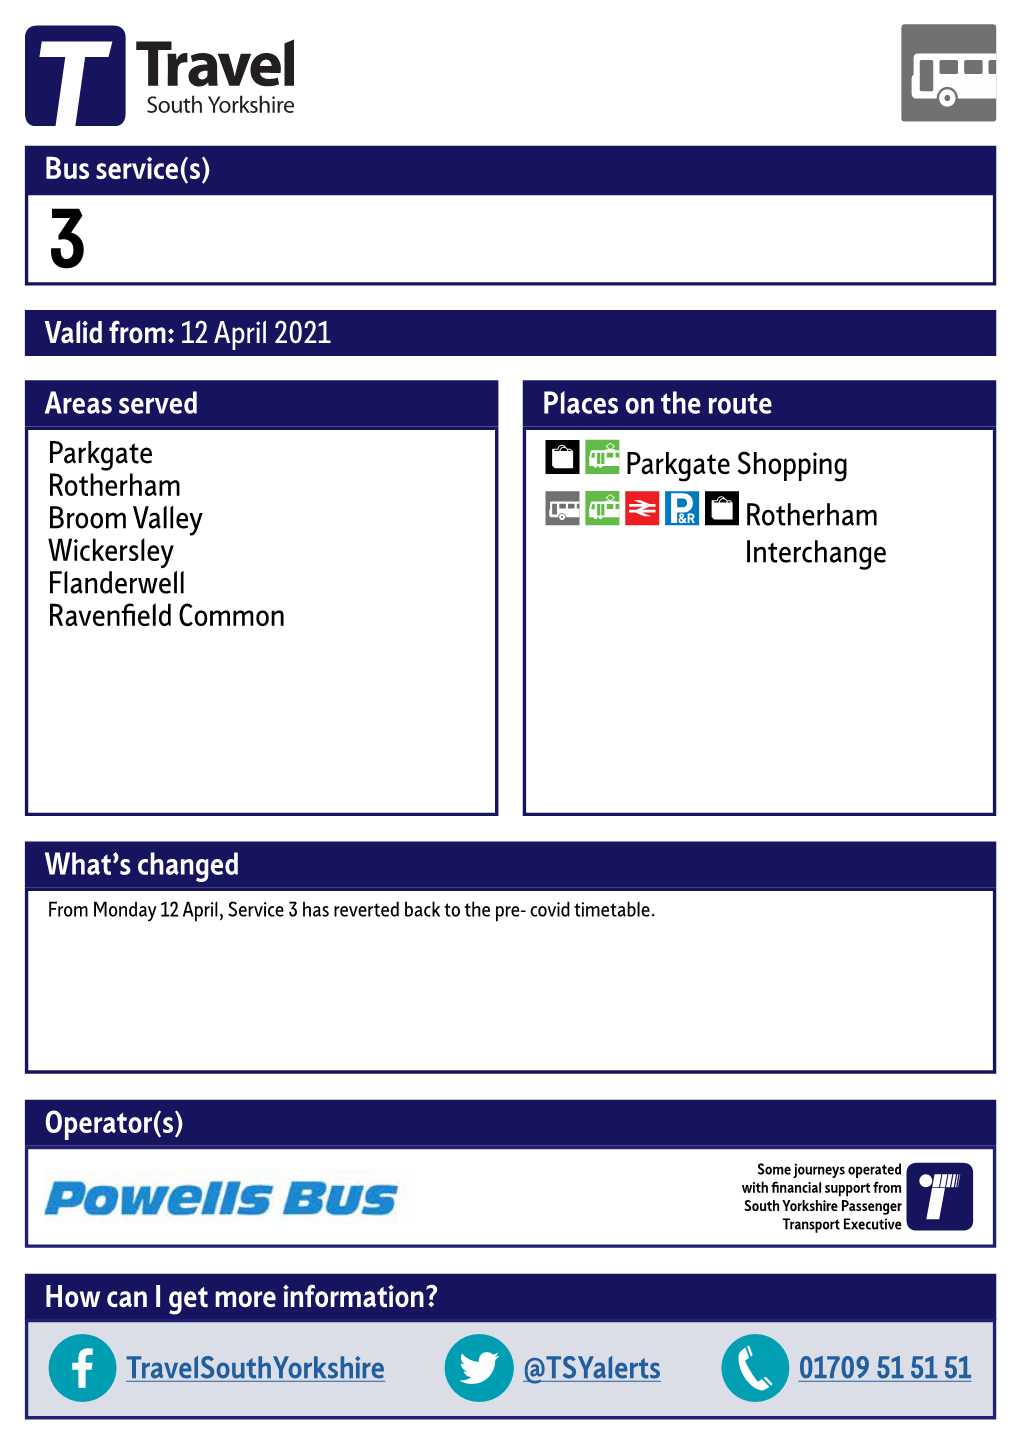 Valid From: 12 April 2021 Bus Service(S